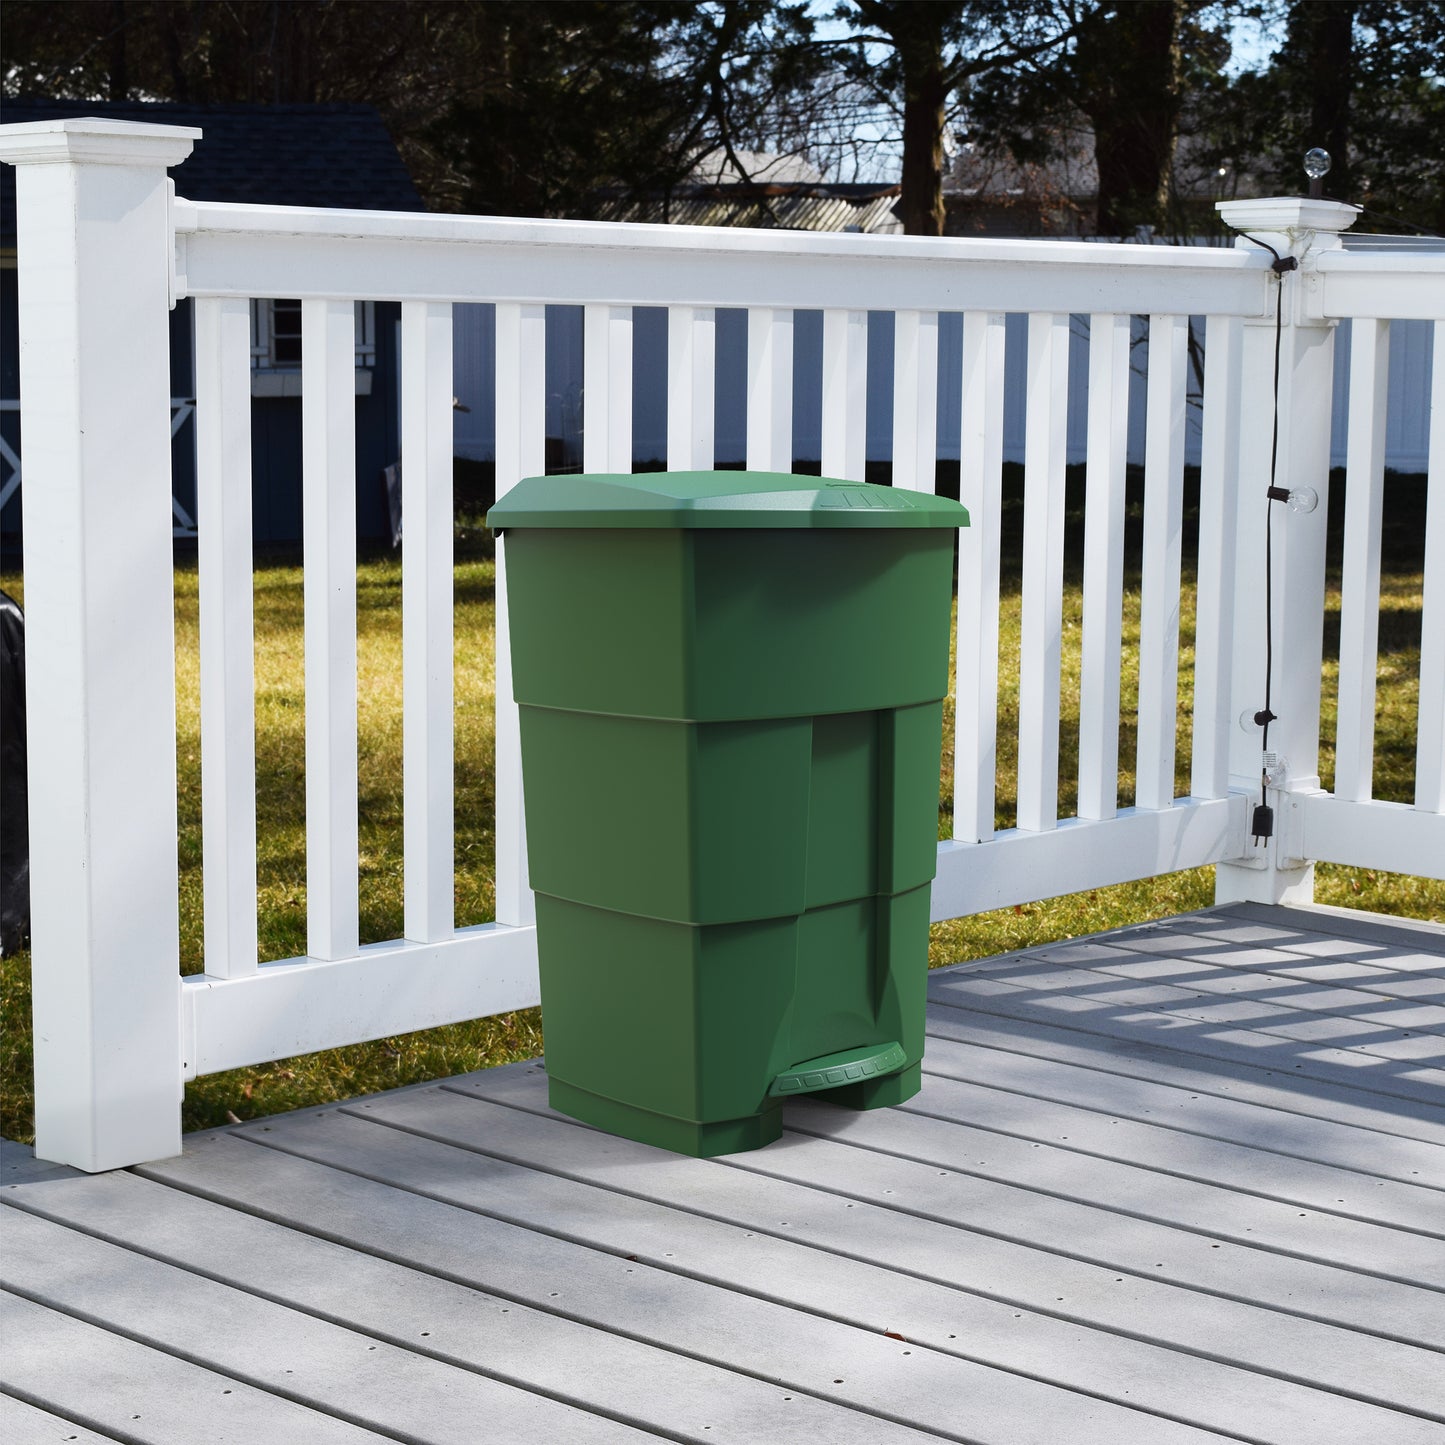 70L Step-on Waste Bin with Pedal